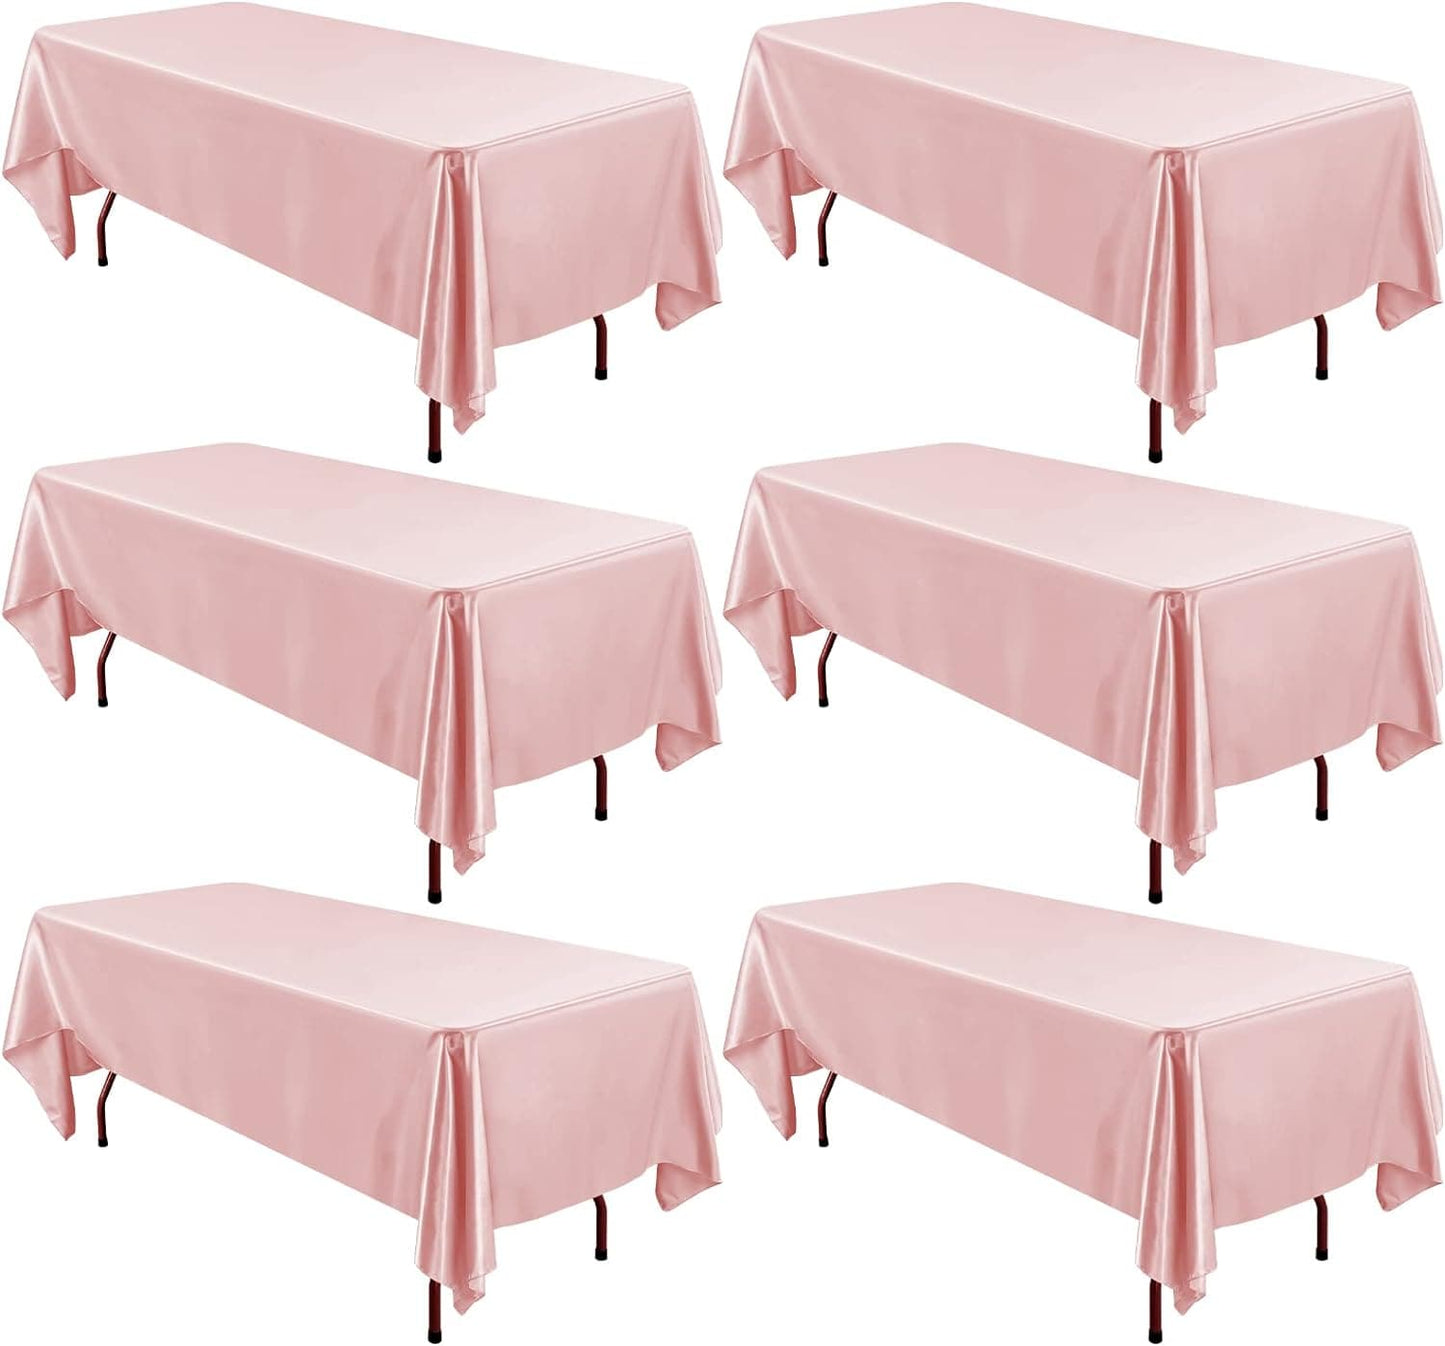 6 Pack Satin Tablecloth 57 x 108 Inch